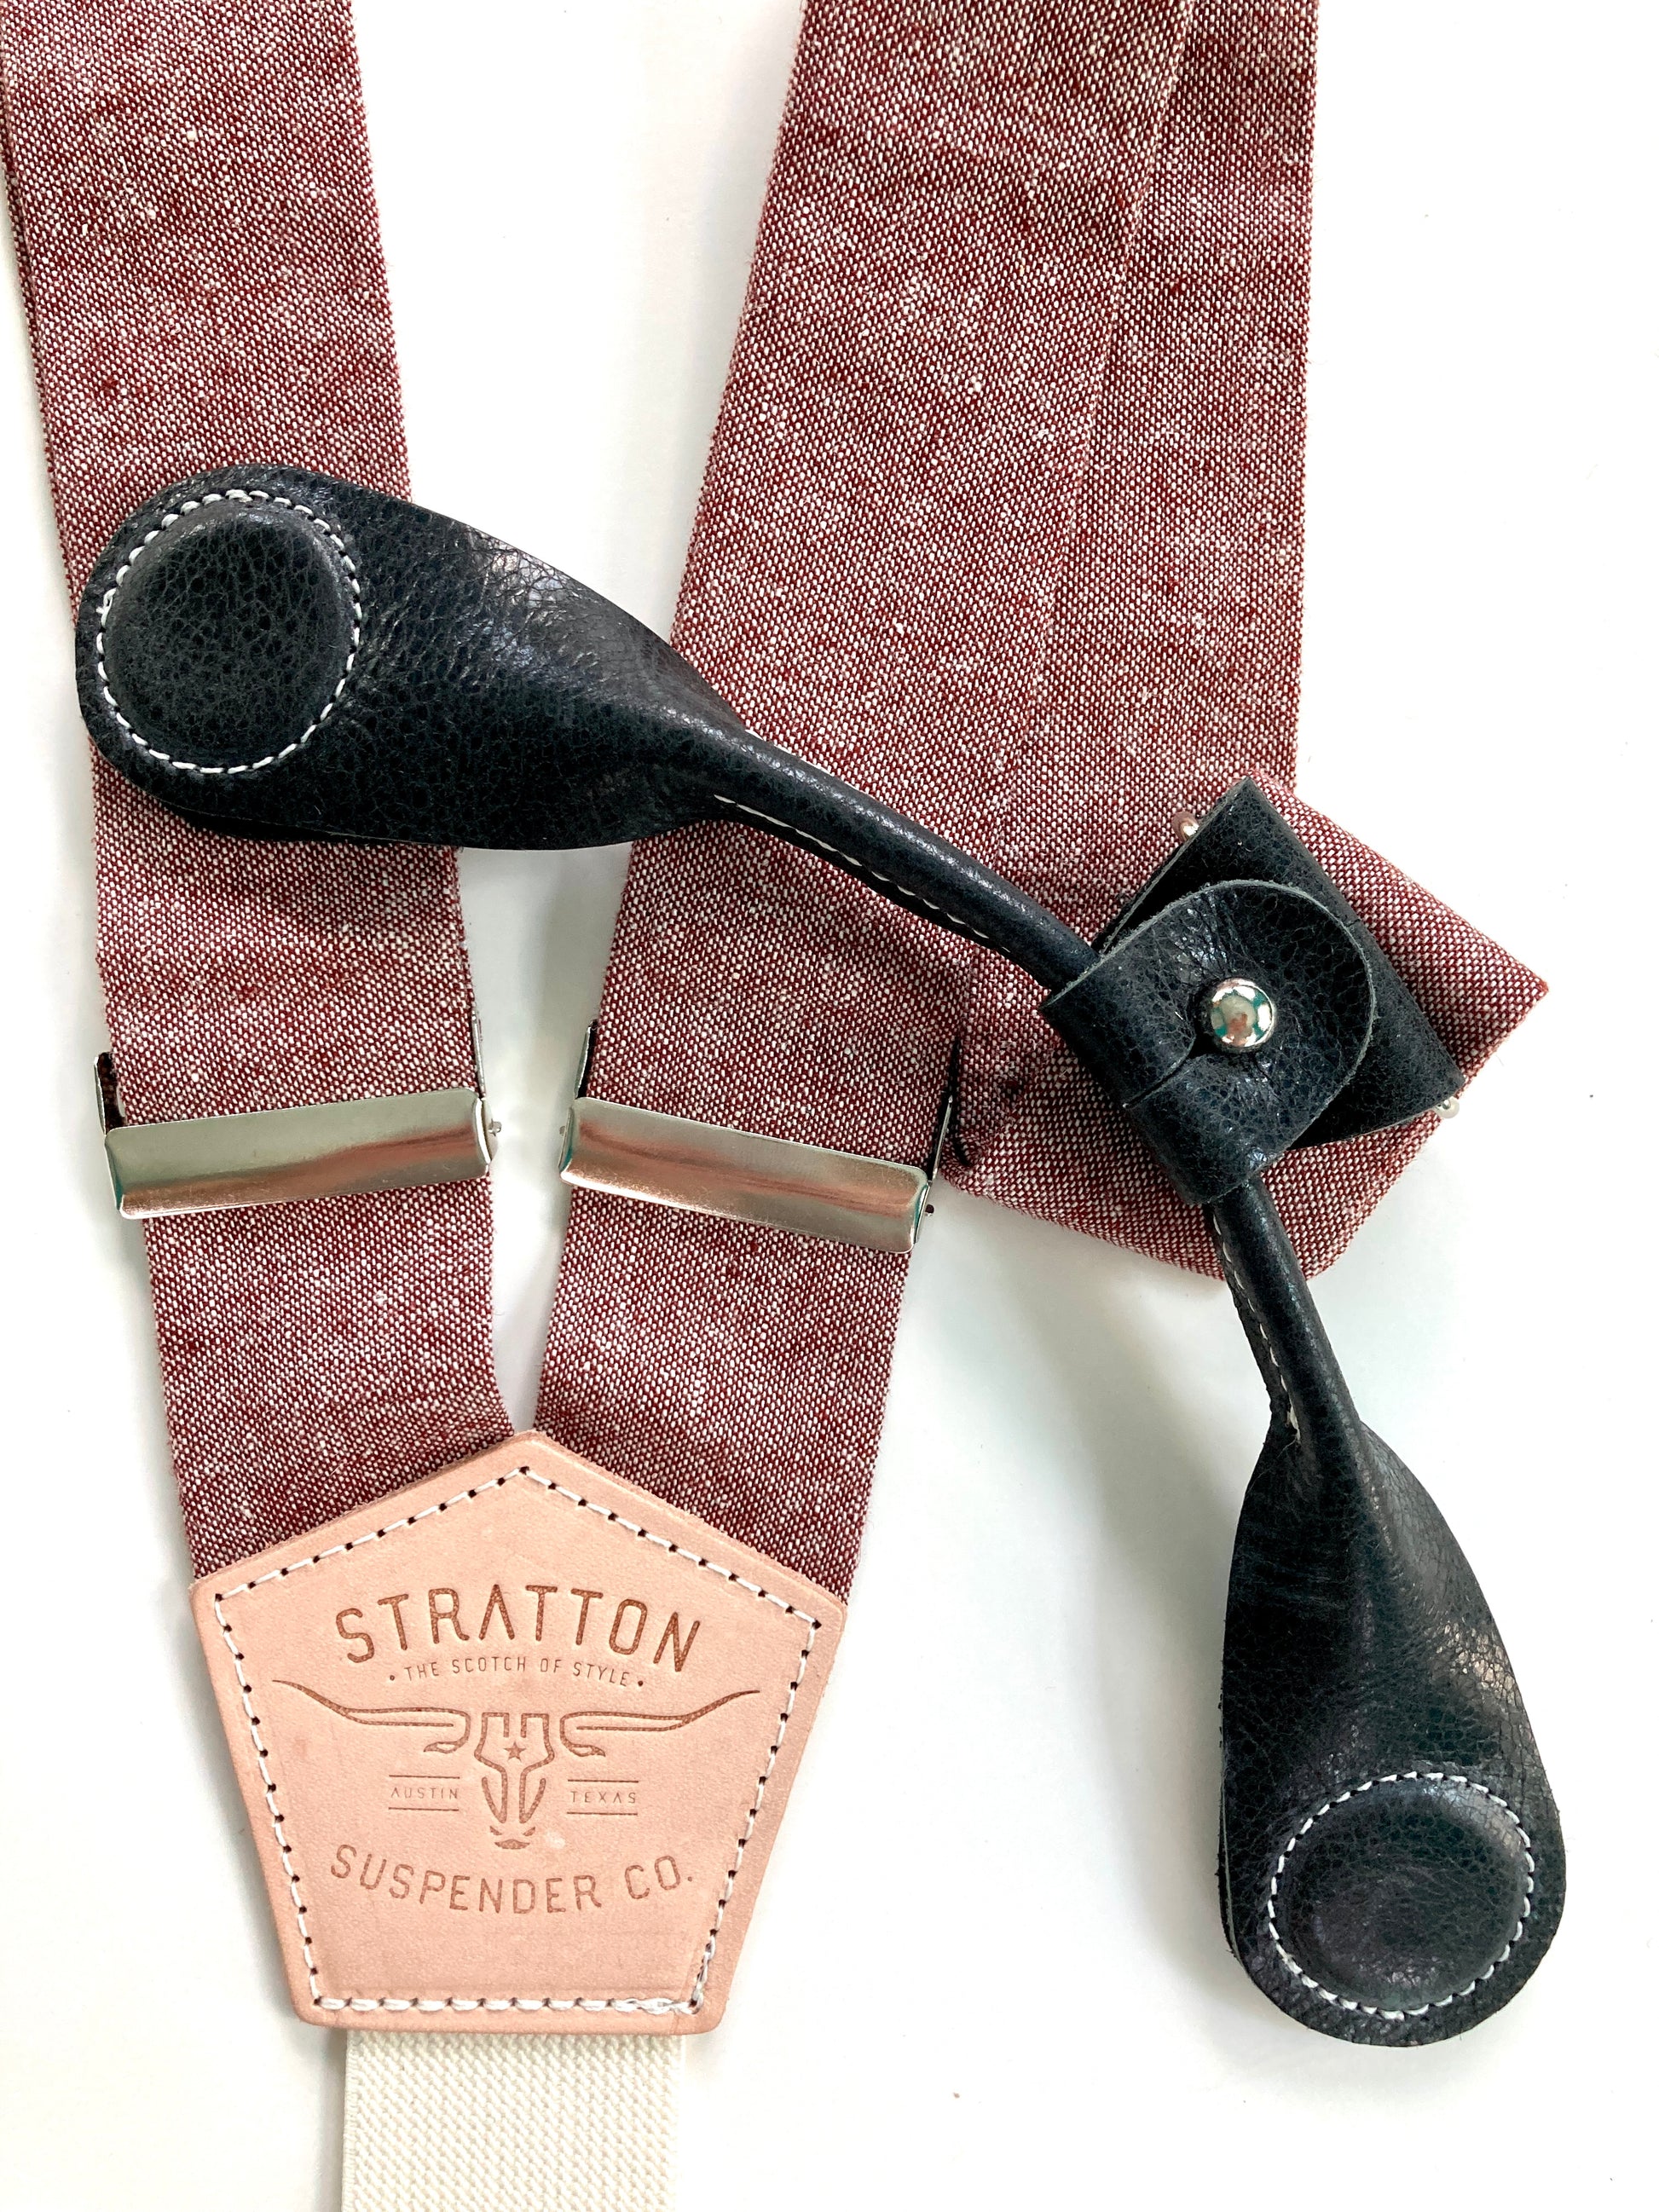 Stratton Suspender Co. features the Rust (Maroon) linen suspenders on veg tan shoulder leather with cream colored elastic back strap for the Fall 2022 suspenders collection Magnetic Stratton Suspender clasps in Black Pontedero Italian leather hand-picked by Stratton Suspender Co.